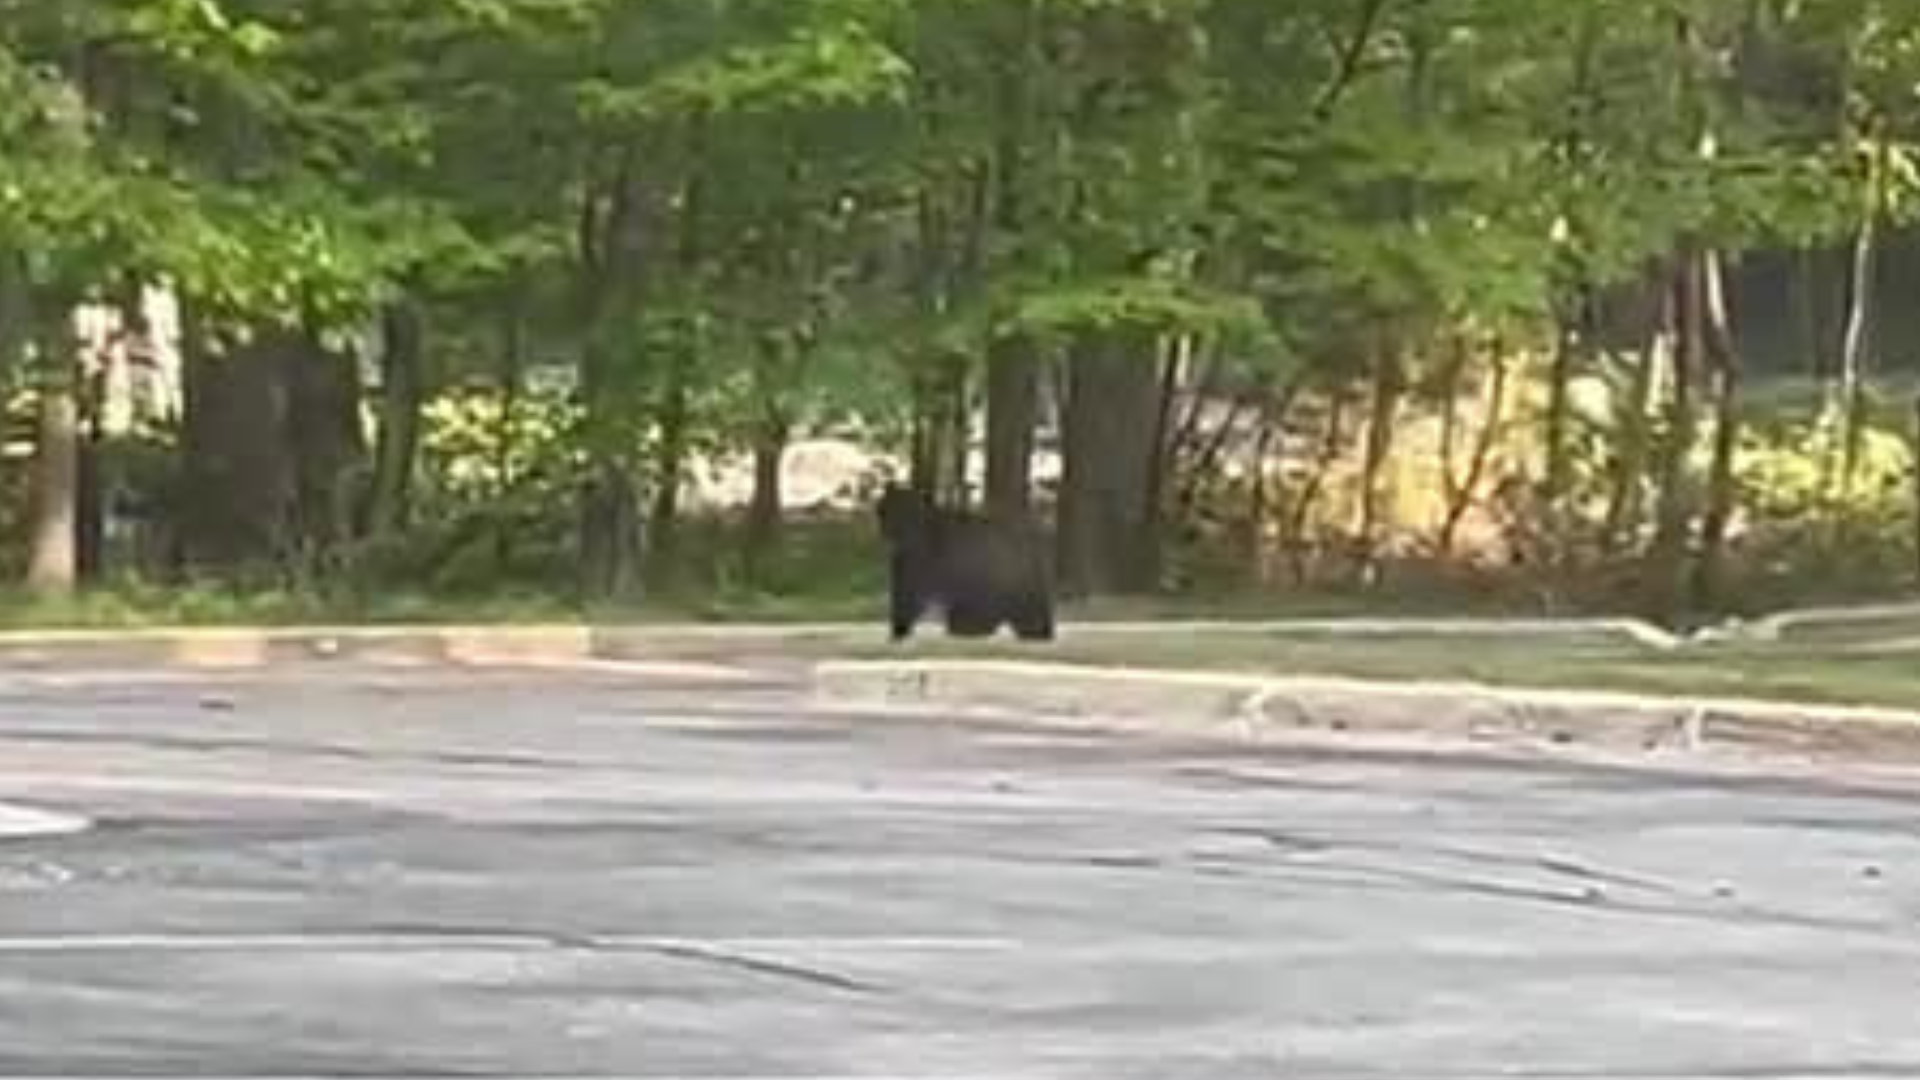 Bear spotted in downtown Ludington, DNR gets it back into the woods safely